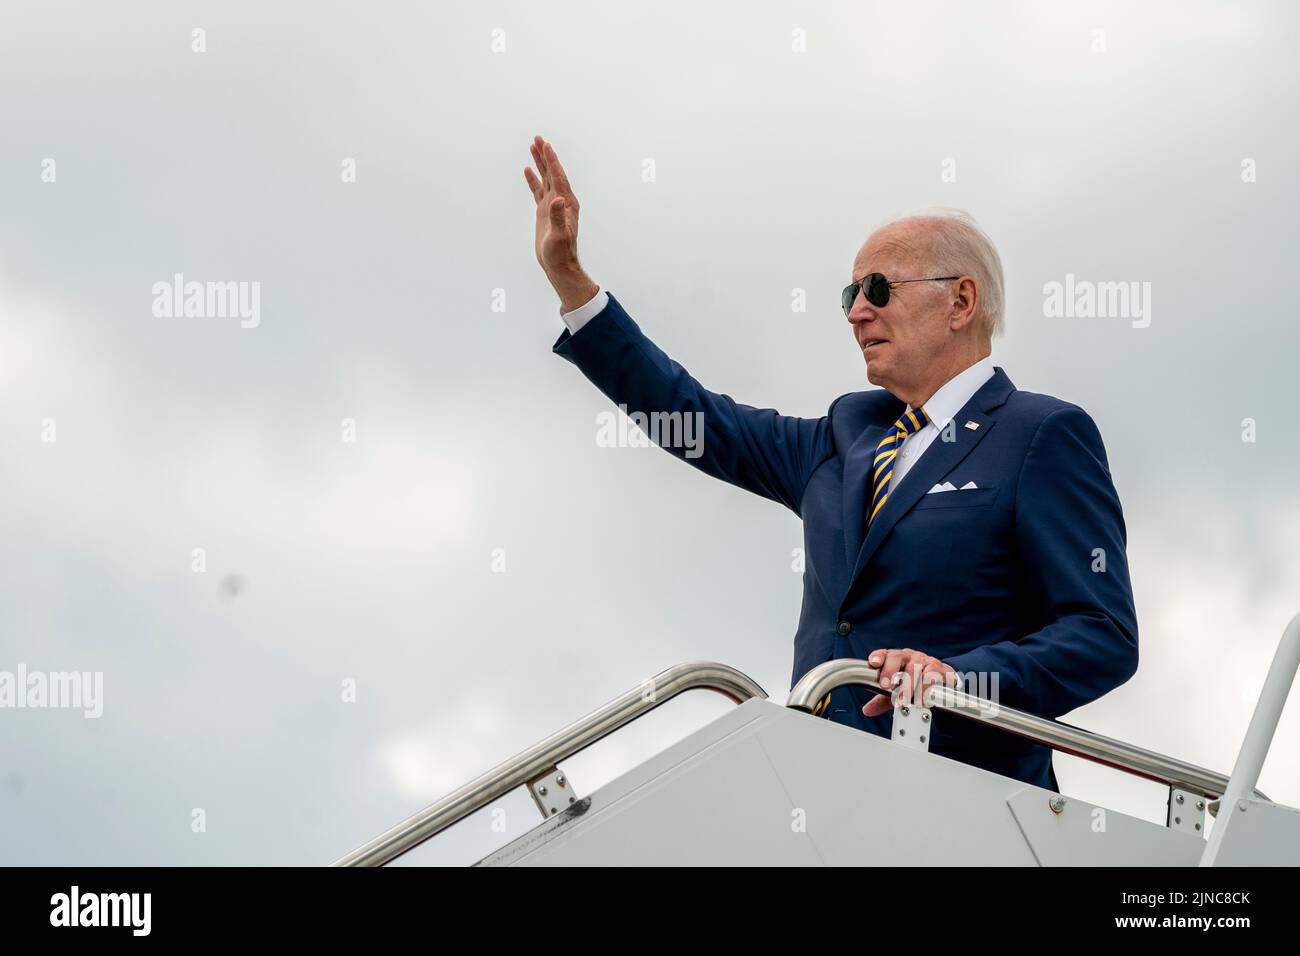 United States President Joe Biden waves as he boards Air Force One at Joint Base Andrews, Maryland, USA, 10 August 2022.Credit: Shawn Thew/Pool via CNP /MediaPunch Stock Photo